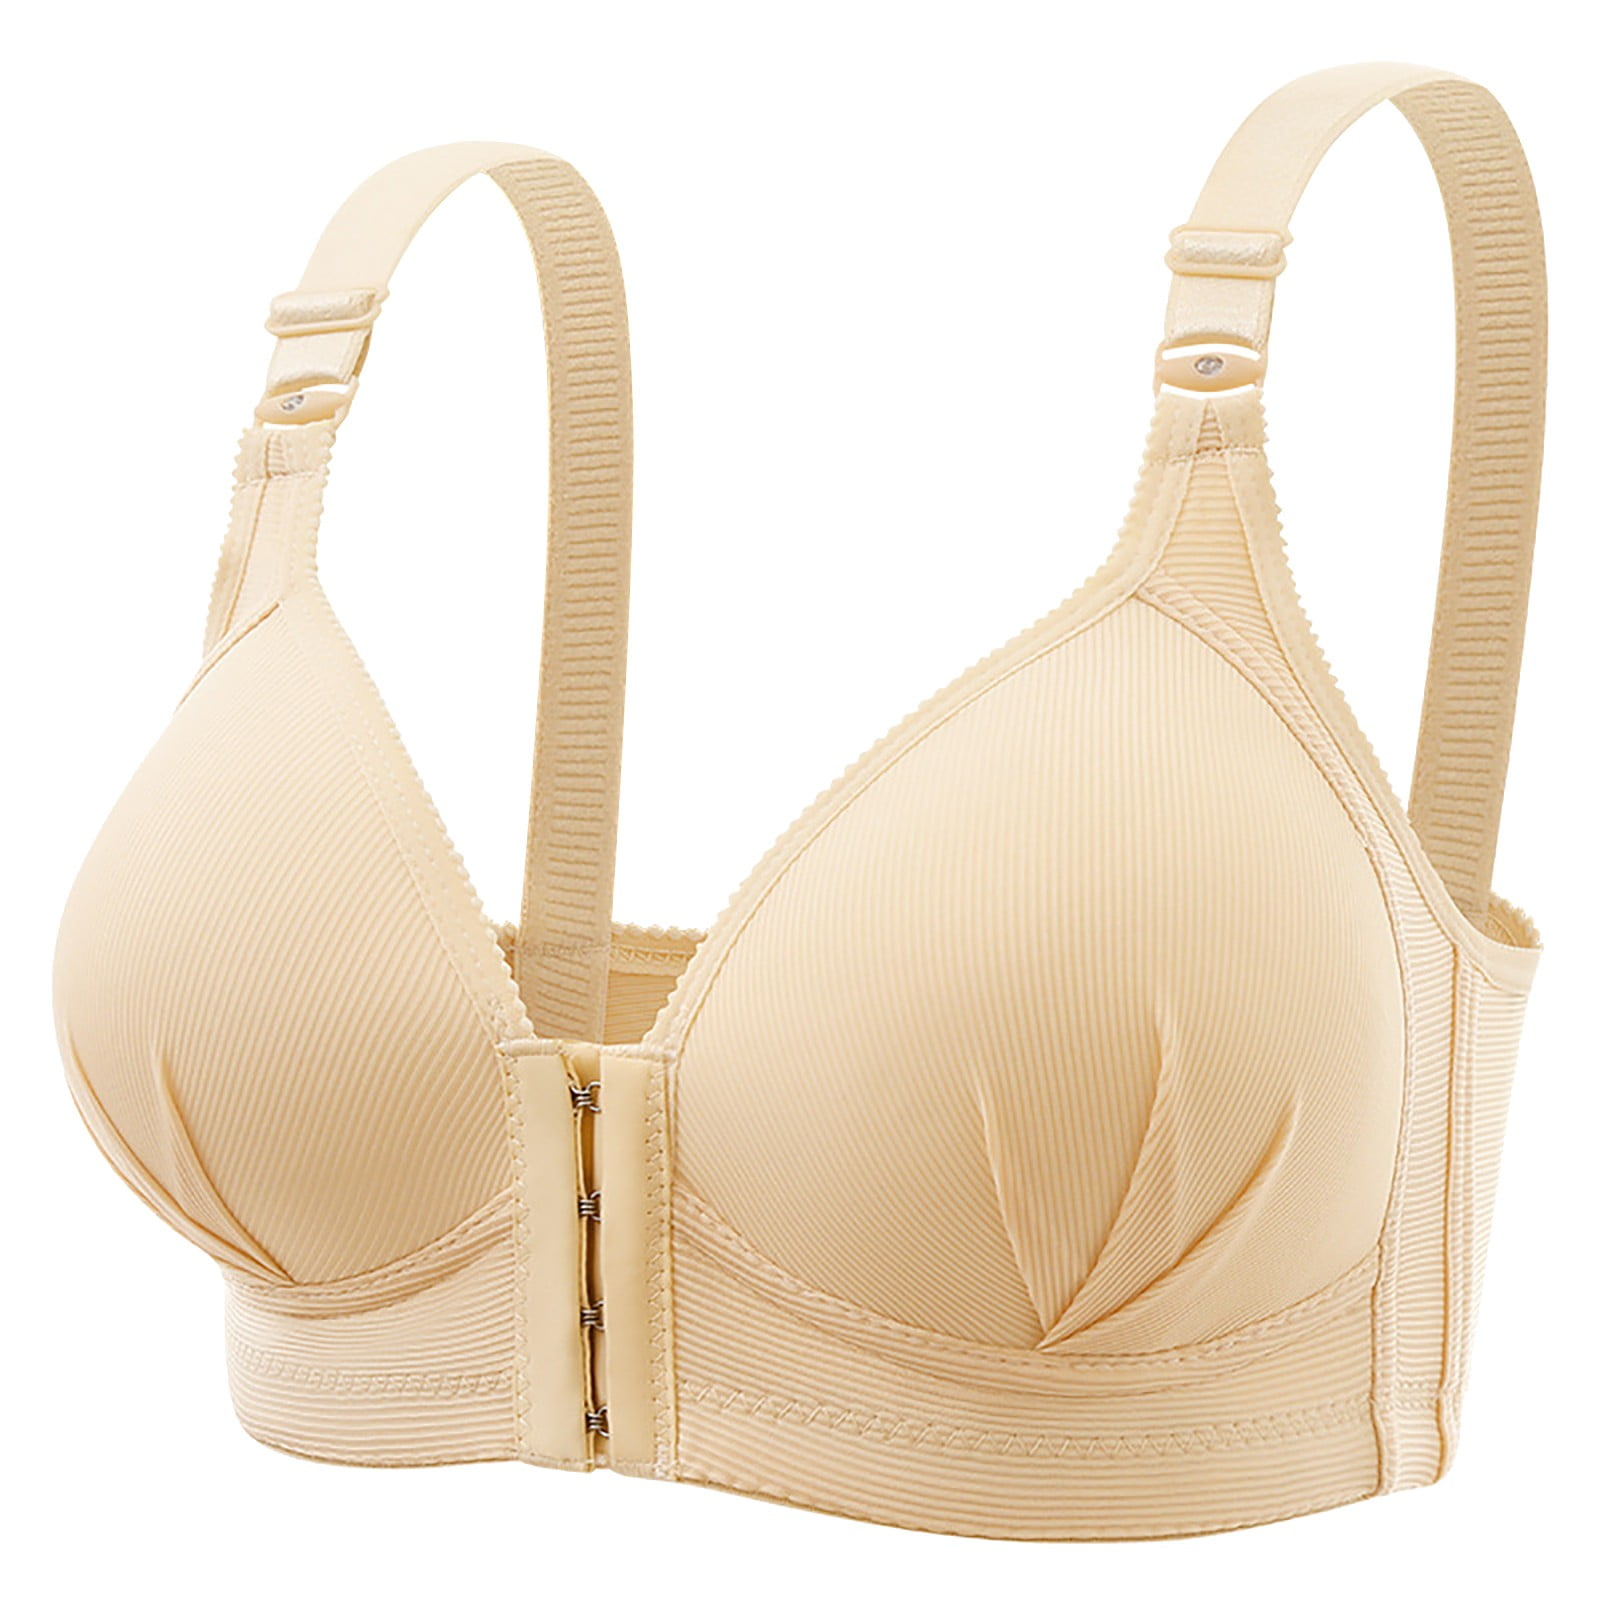 Aayomet Push Up Bras for Women Women Full Cup Thin Underwear Plus Size  Wireless Sports Bra Lace Bra Cover Cup Large Size,Khaki XL